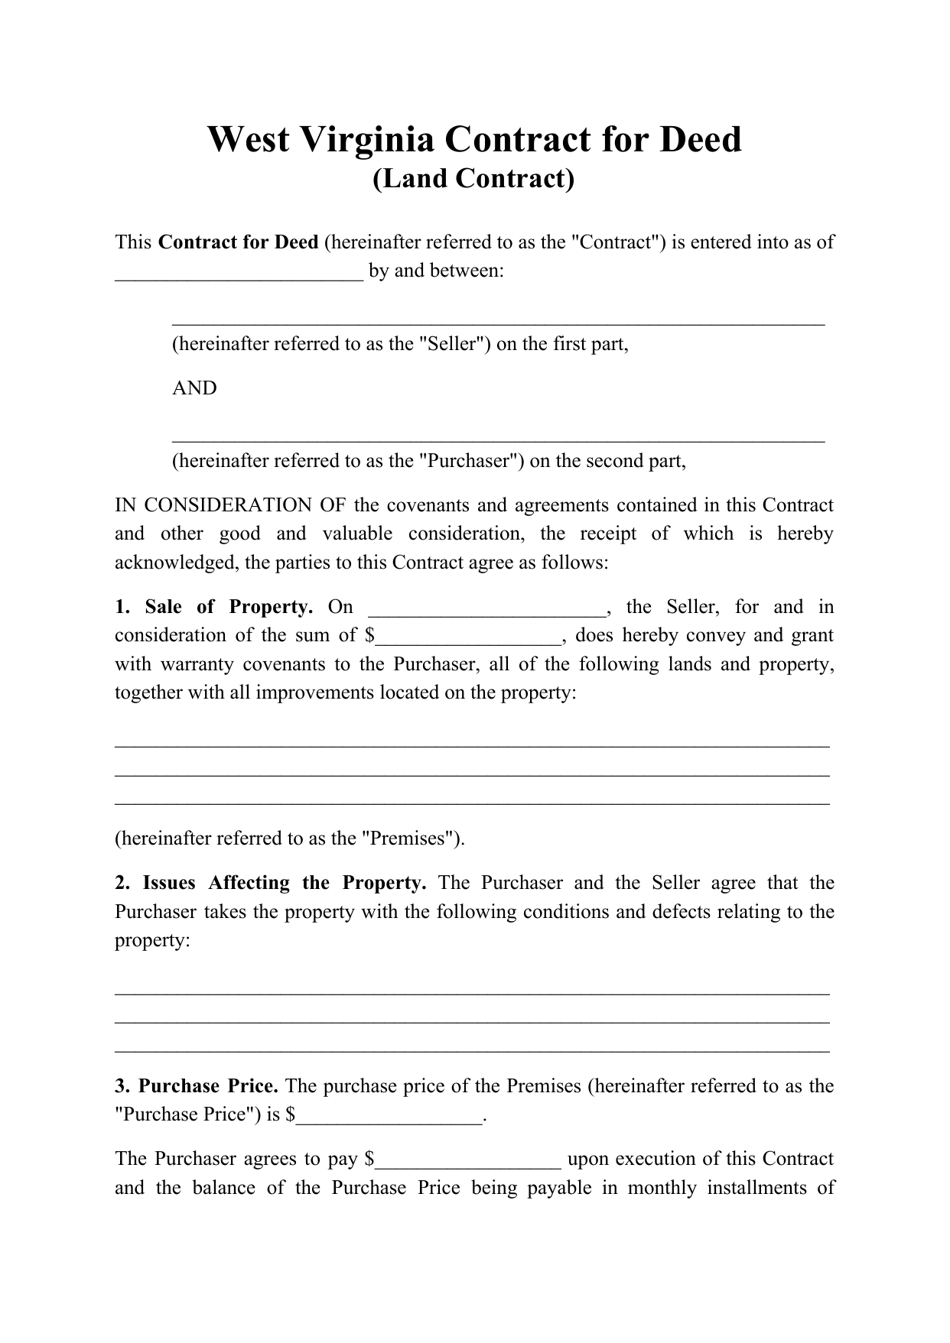 Contract for Deed (Land Contract) - West Virginia, Page 1